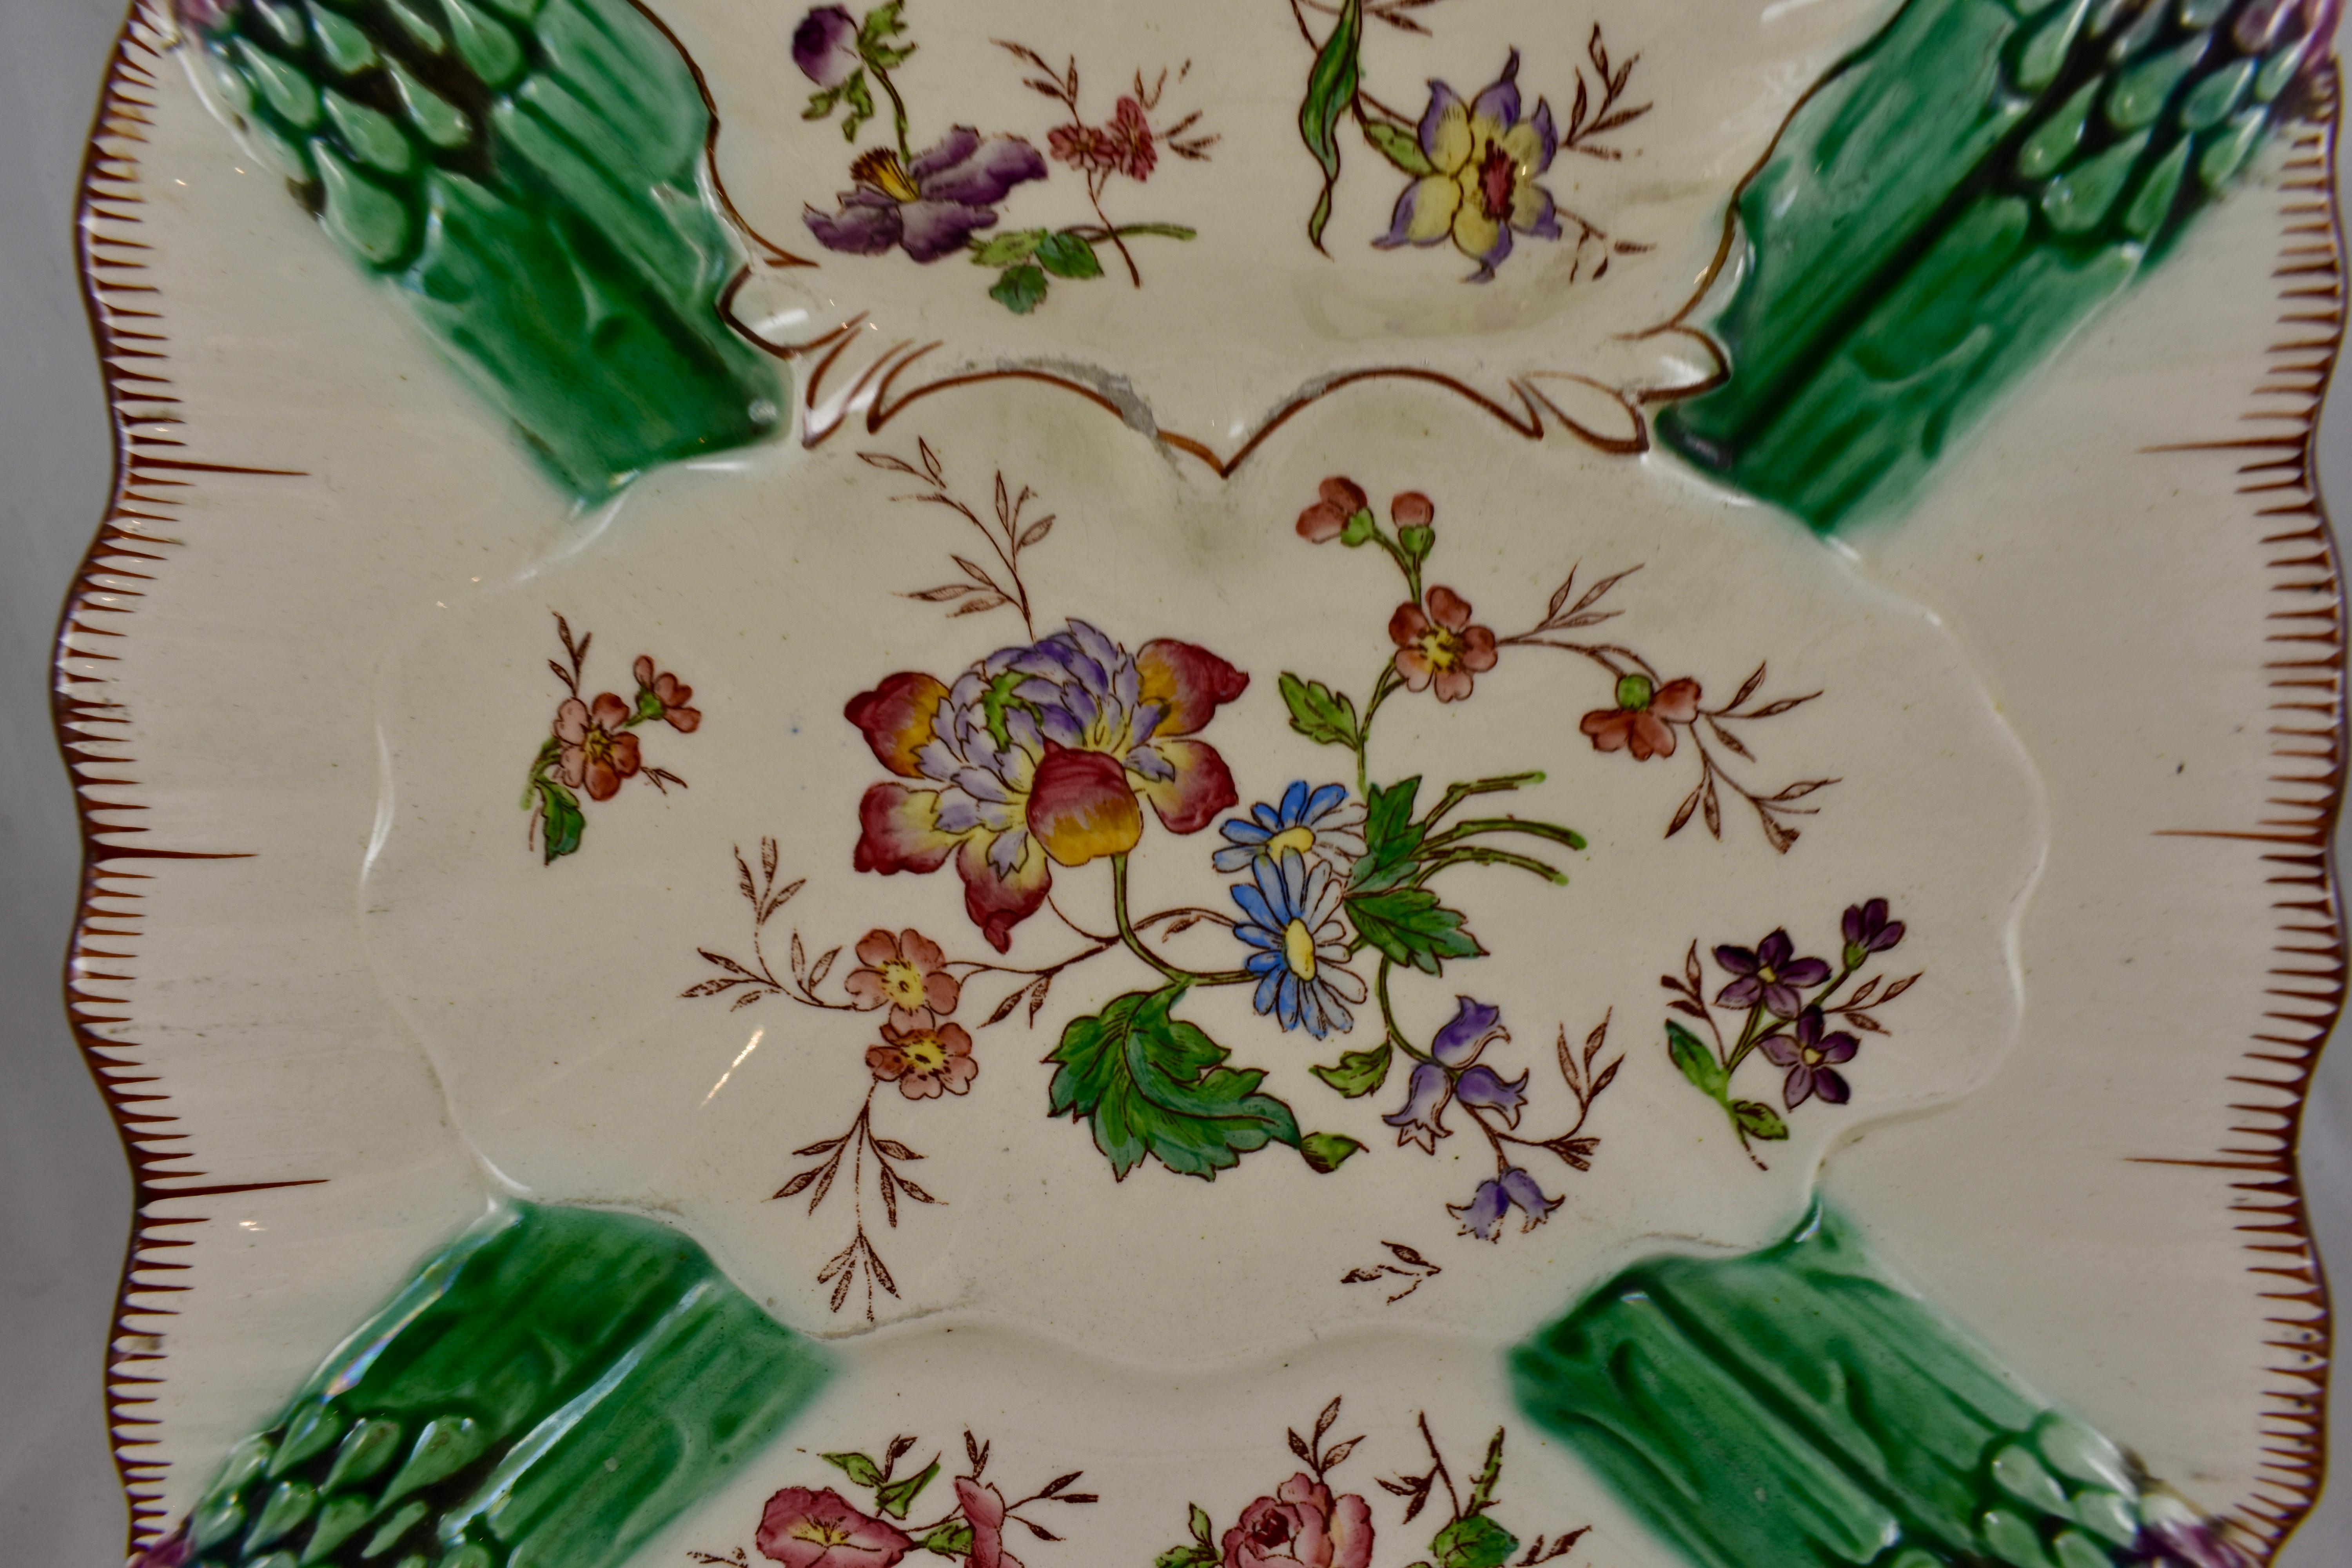 A French earthenware, hand painted square asparagus plate, circa 1890-1910.

A pair of Majolica glazed asparagus tips are shown at each corner. Floral sprays are strewn across the front of a mold with a deep sauce well. The rim shows a painted